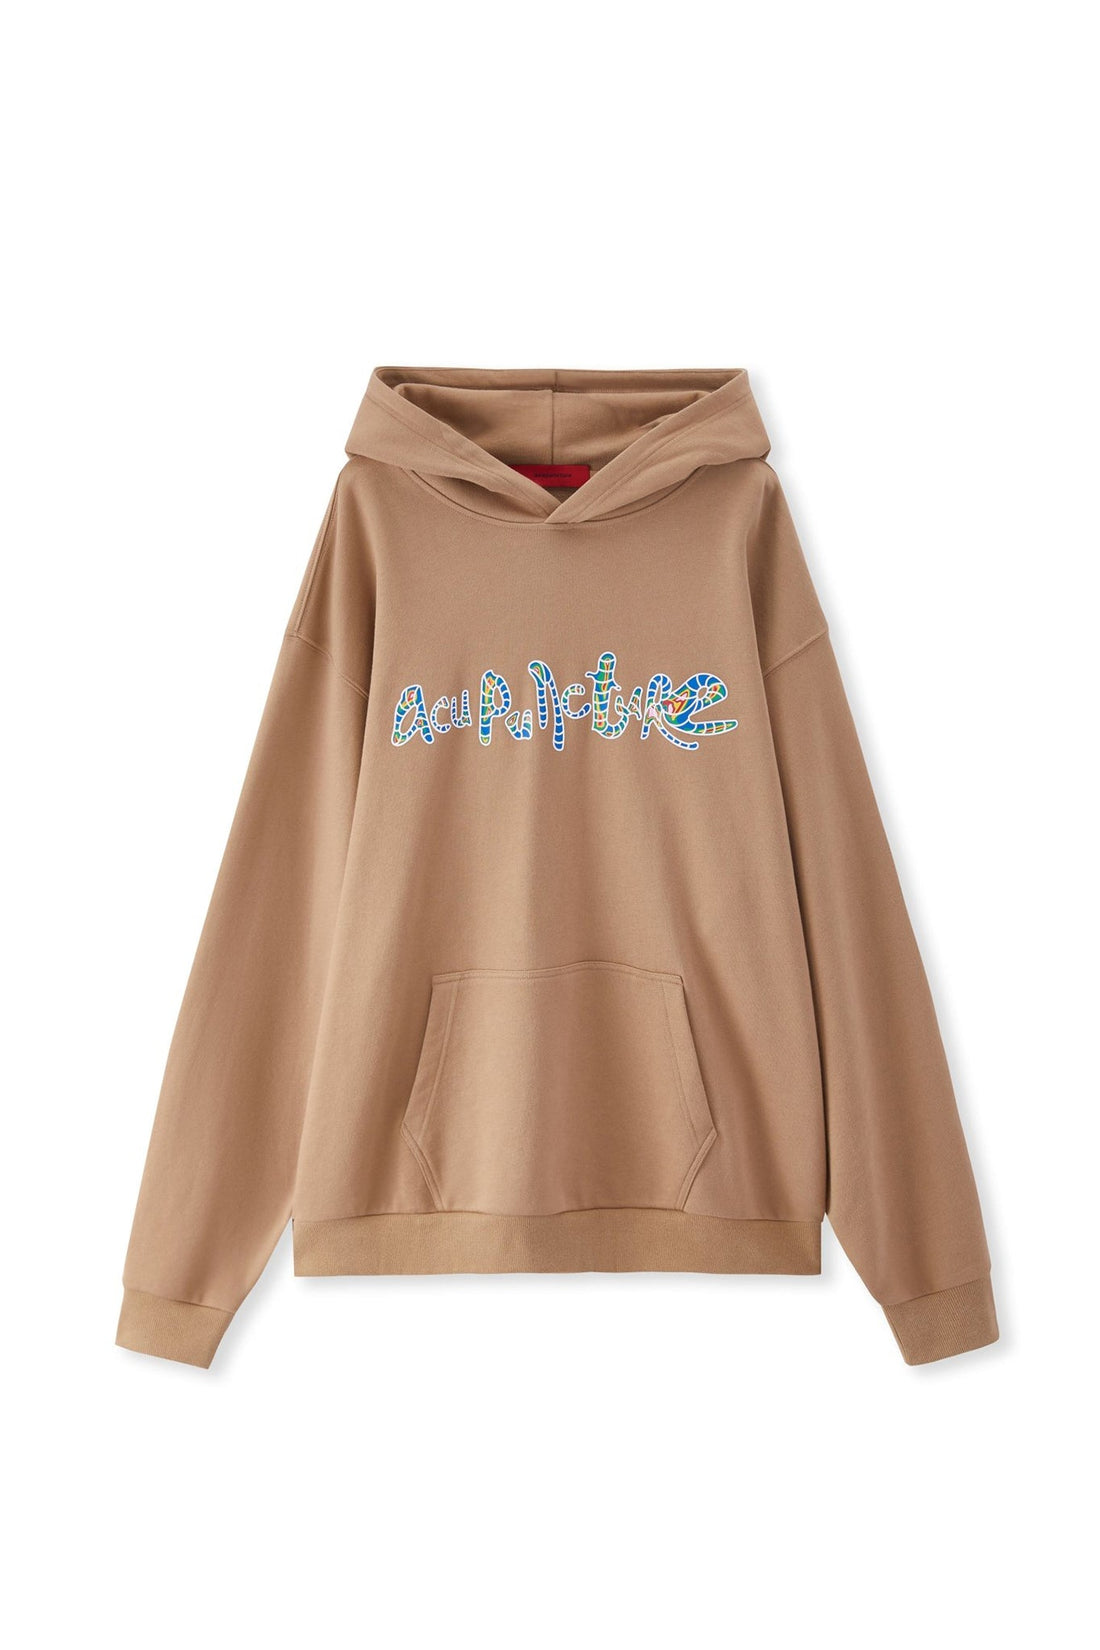 TRUST THE PROCESS HOODIE BROWN Acupuncture